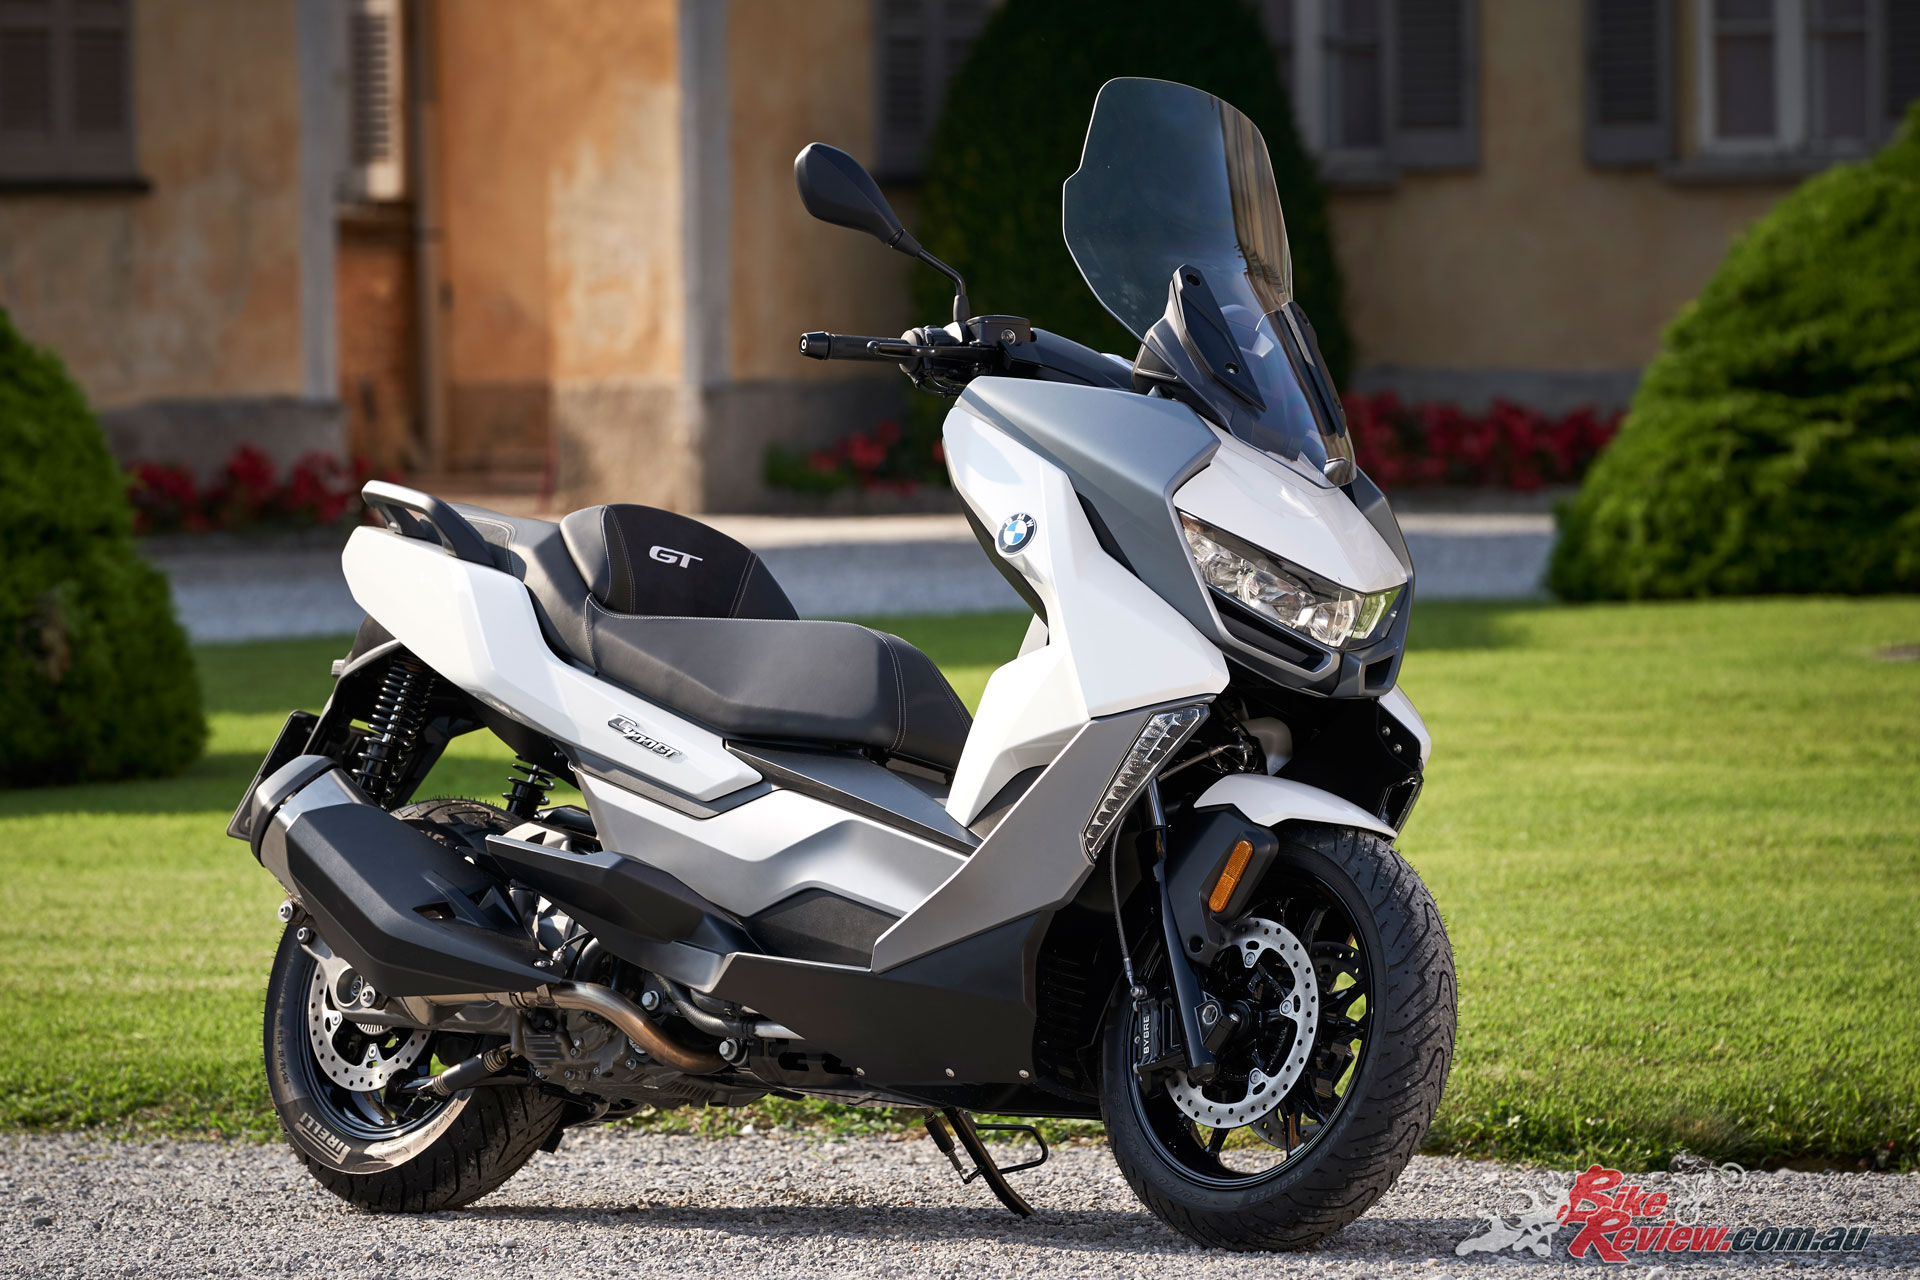 vedtage Kosciuszko desinficere New Model: BMW C 400 GT Scooter - Bike Review